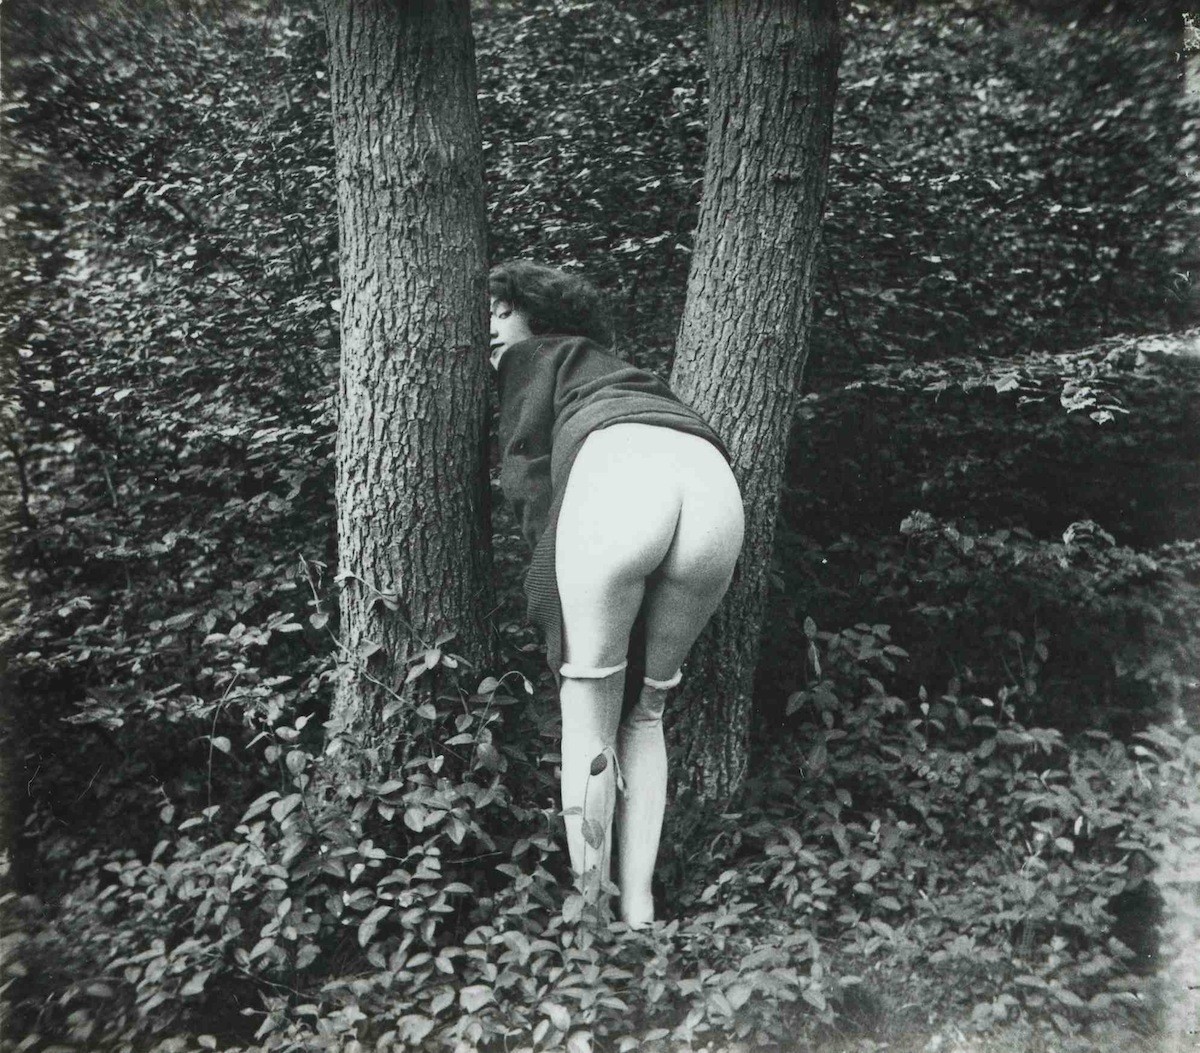 Charming Pornographic Photographs of French Prostitutes from the 1930s